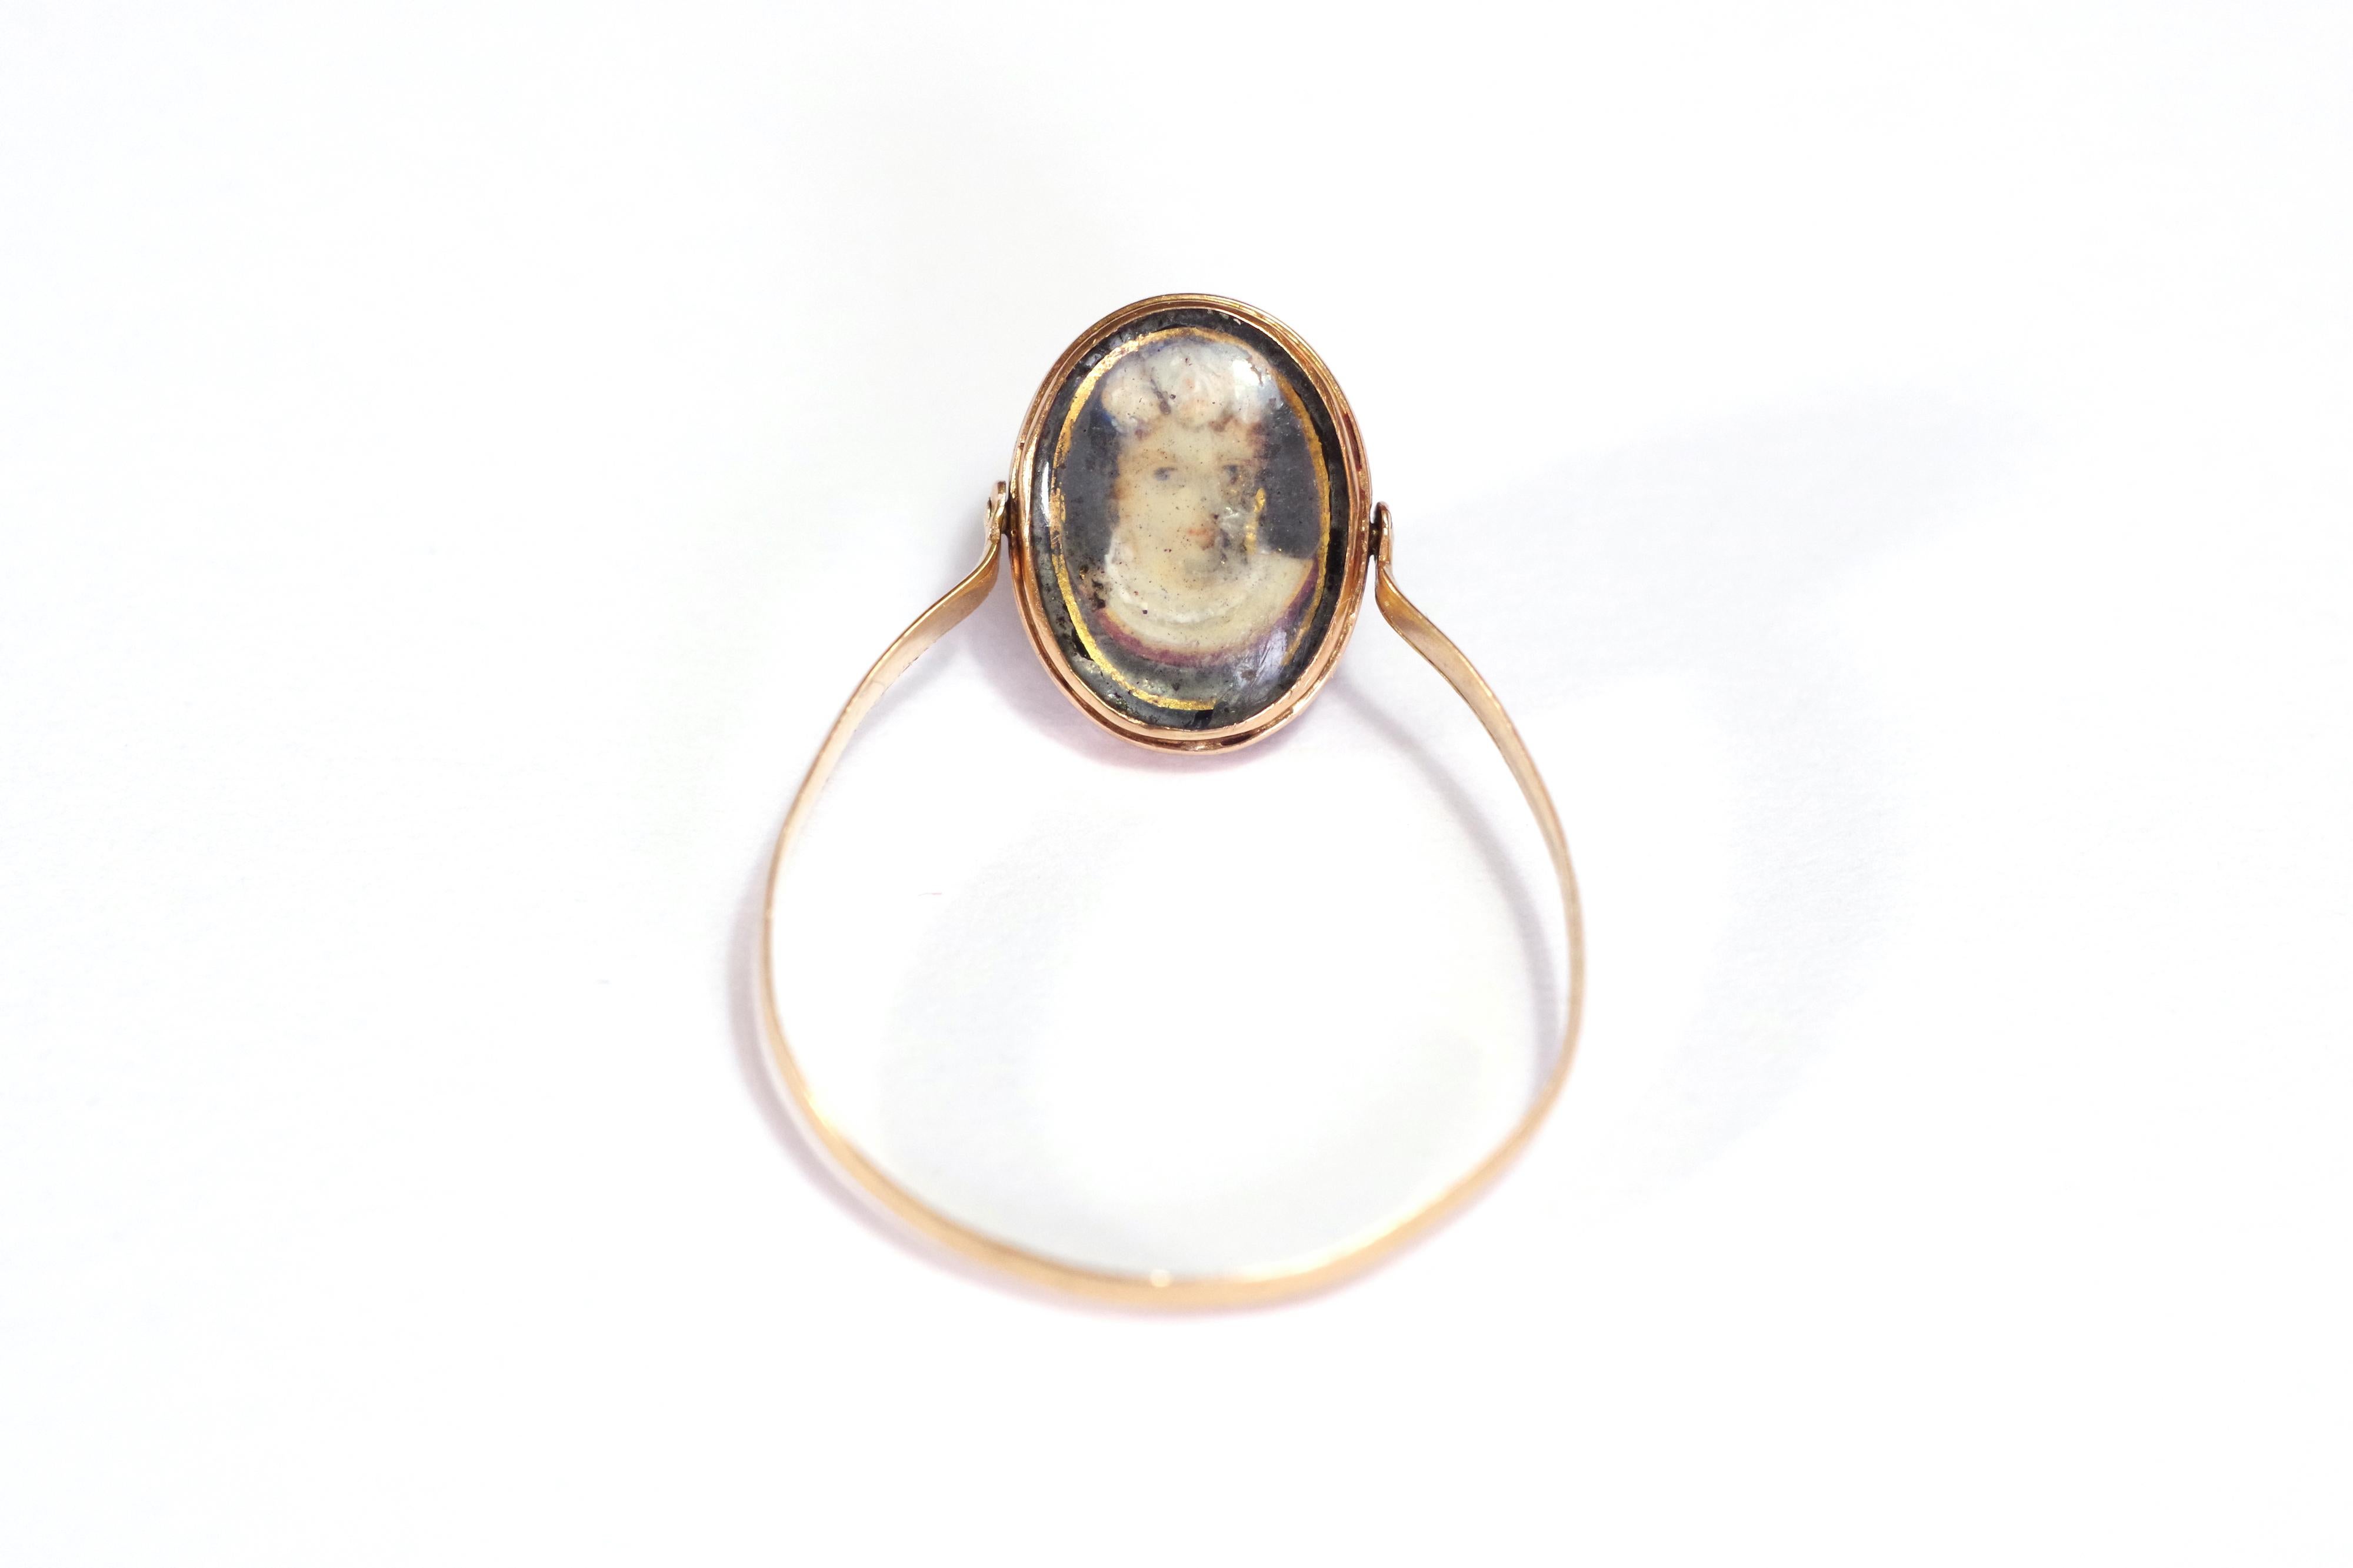 Georgian portrait swivel ring in 18 karat yellow gold. Antique ring with pivoting bezel, decorated with pansies and a portrait of a young woman. The miniatures are painted on mother-of-pearl and circled in black and gold. Swivel sentiment ring from